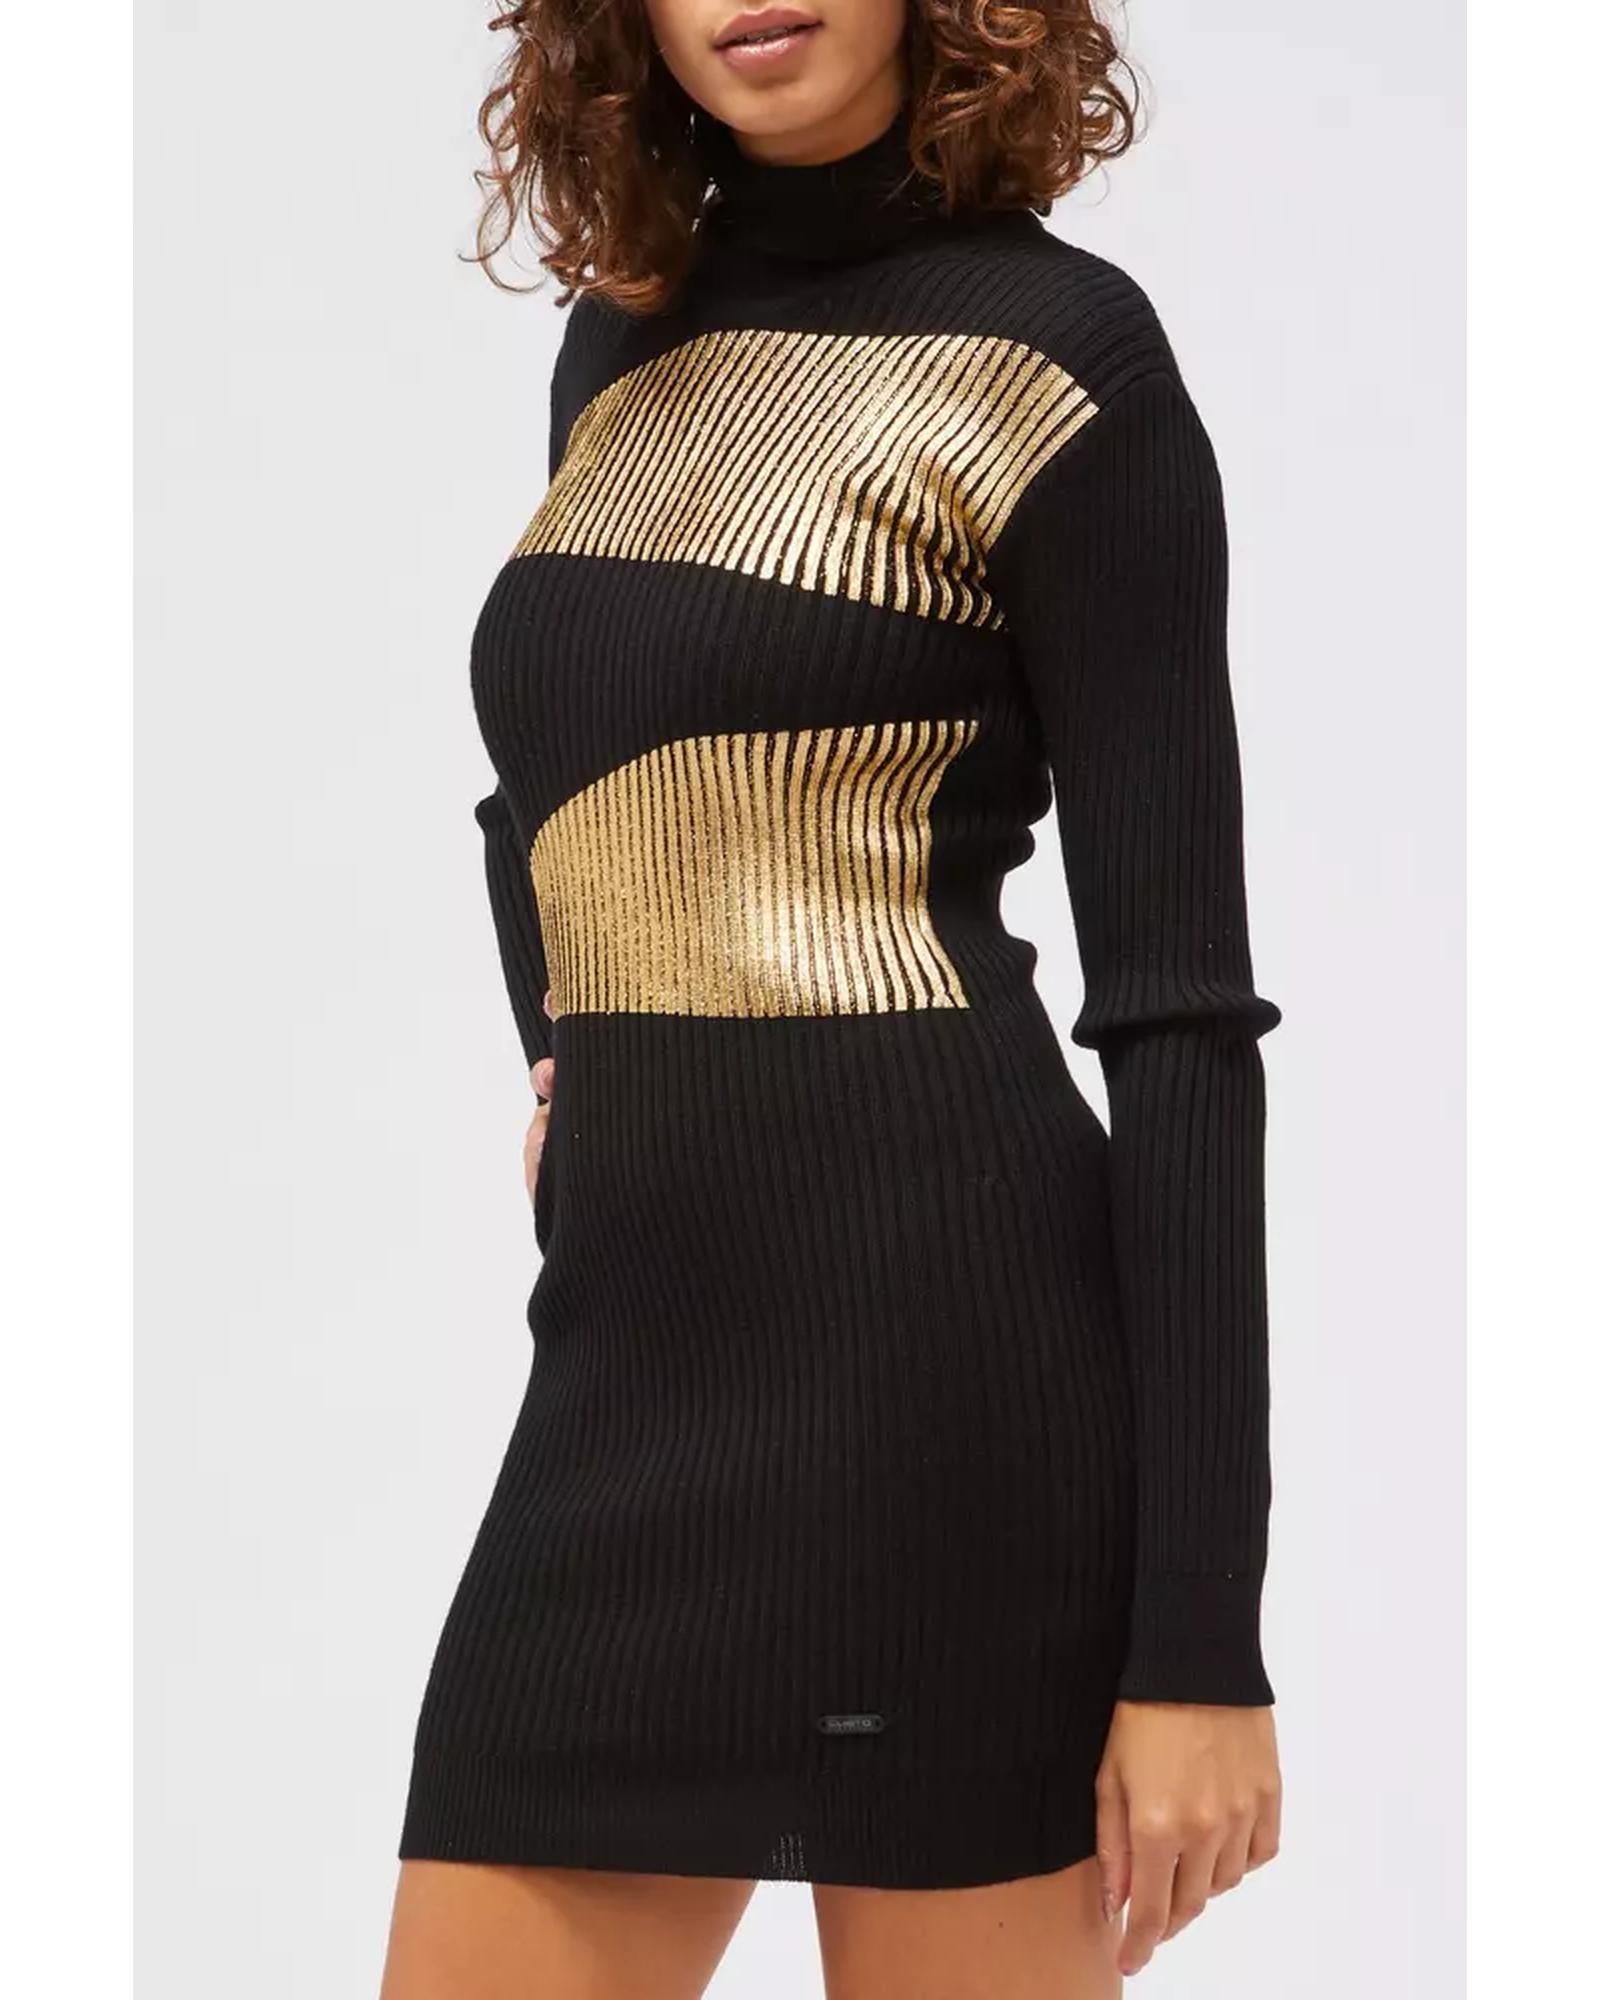 Knitted Dress with Laminated Effect and Polo Neck 42 IT Women